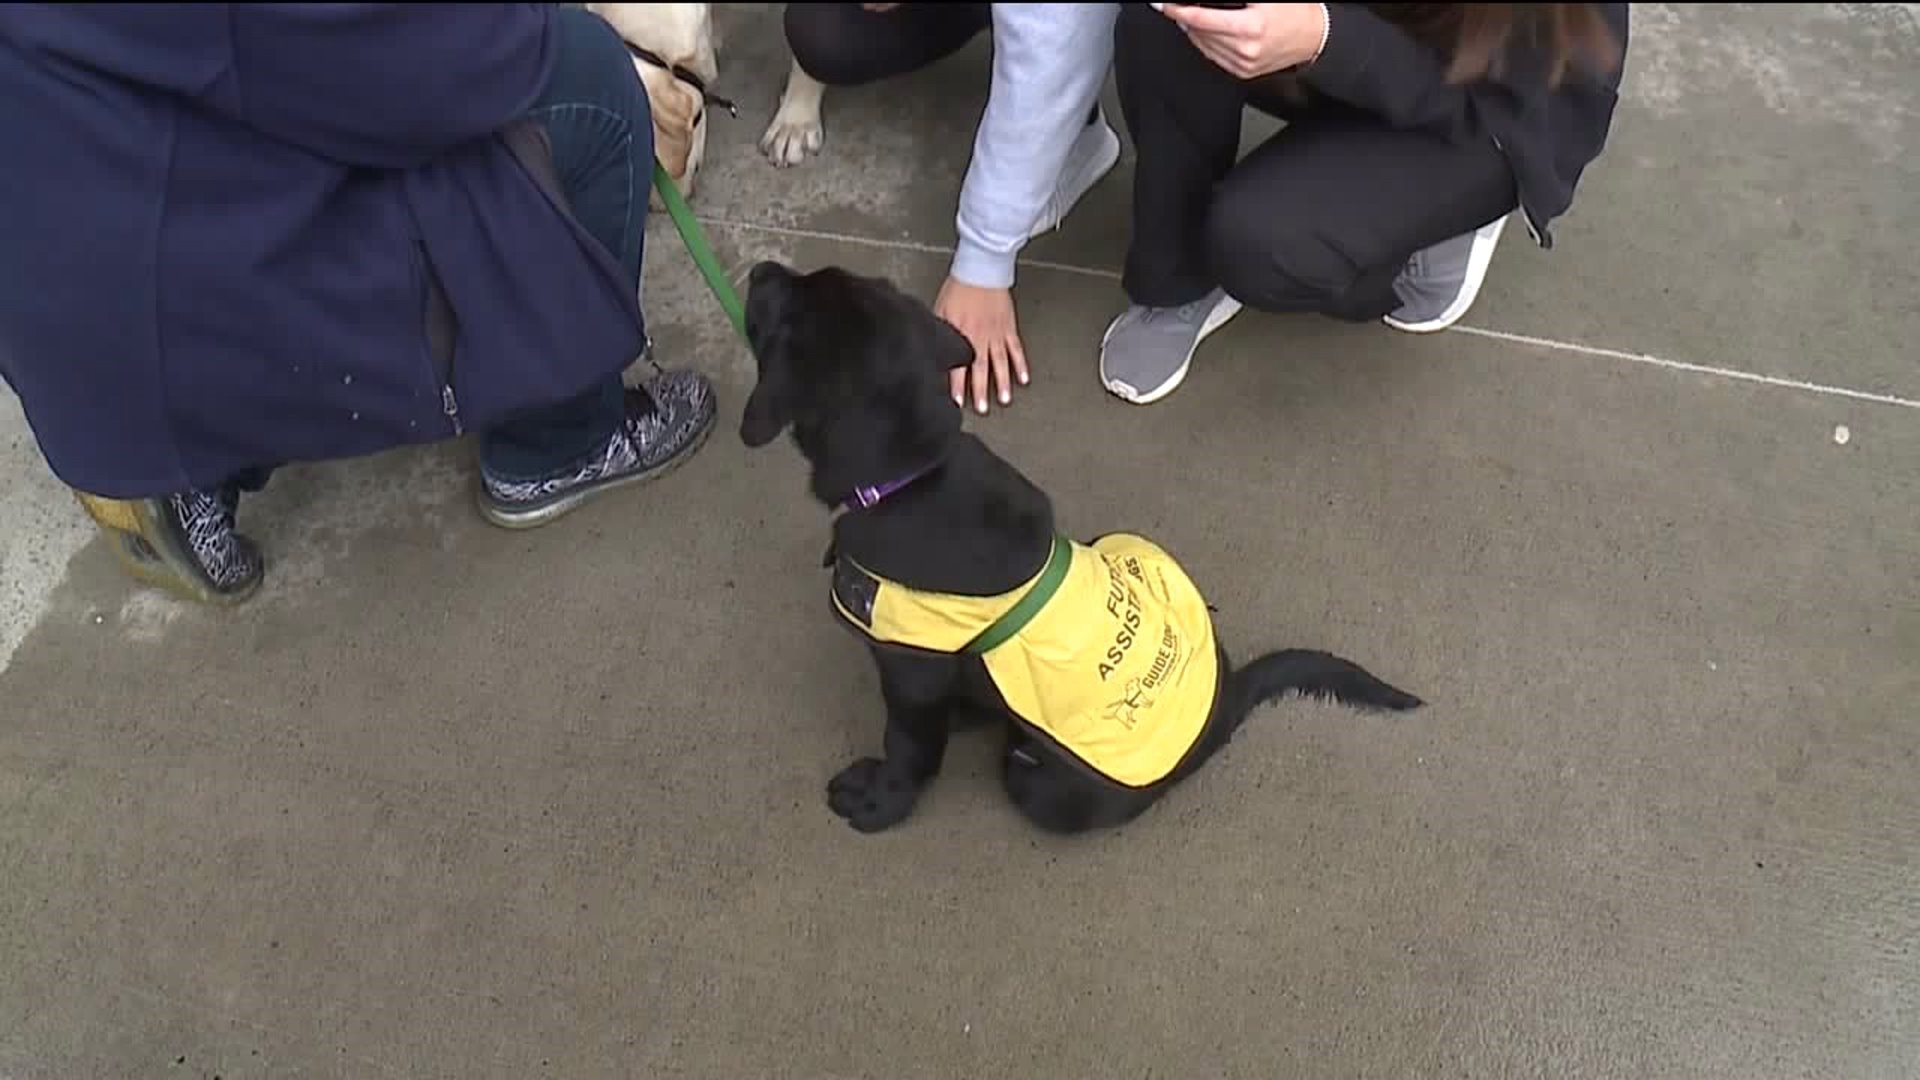 Service Dogs in Training Give Students a Surprise Visit